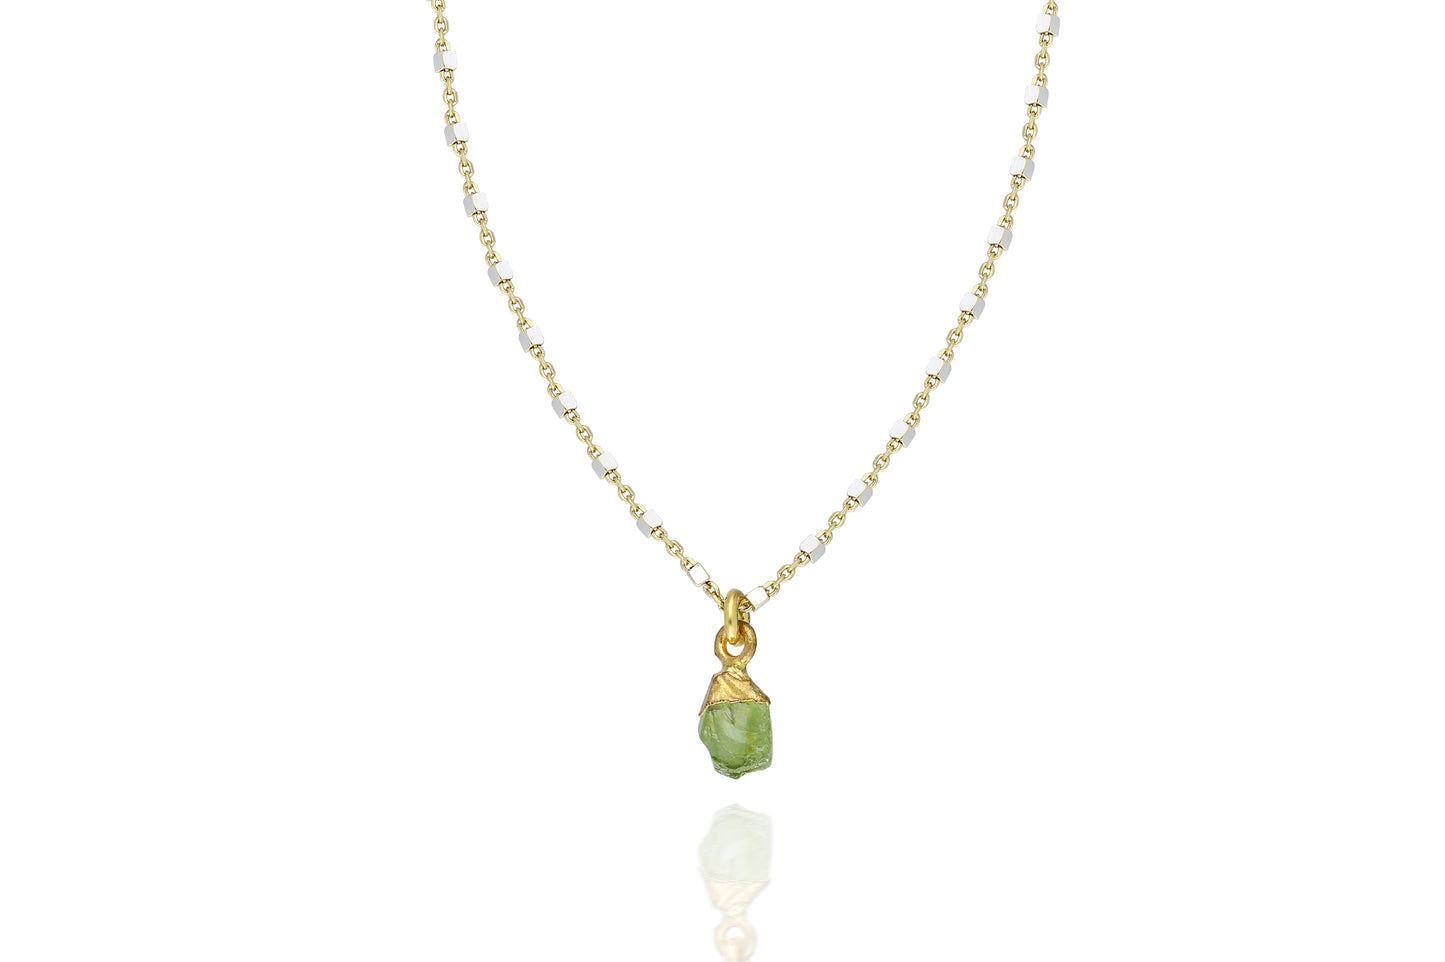 Two-tone Silver Necklace With Peridot Pendant